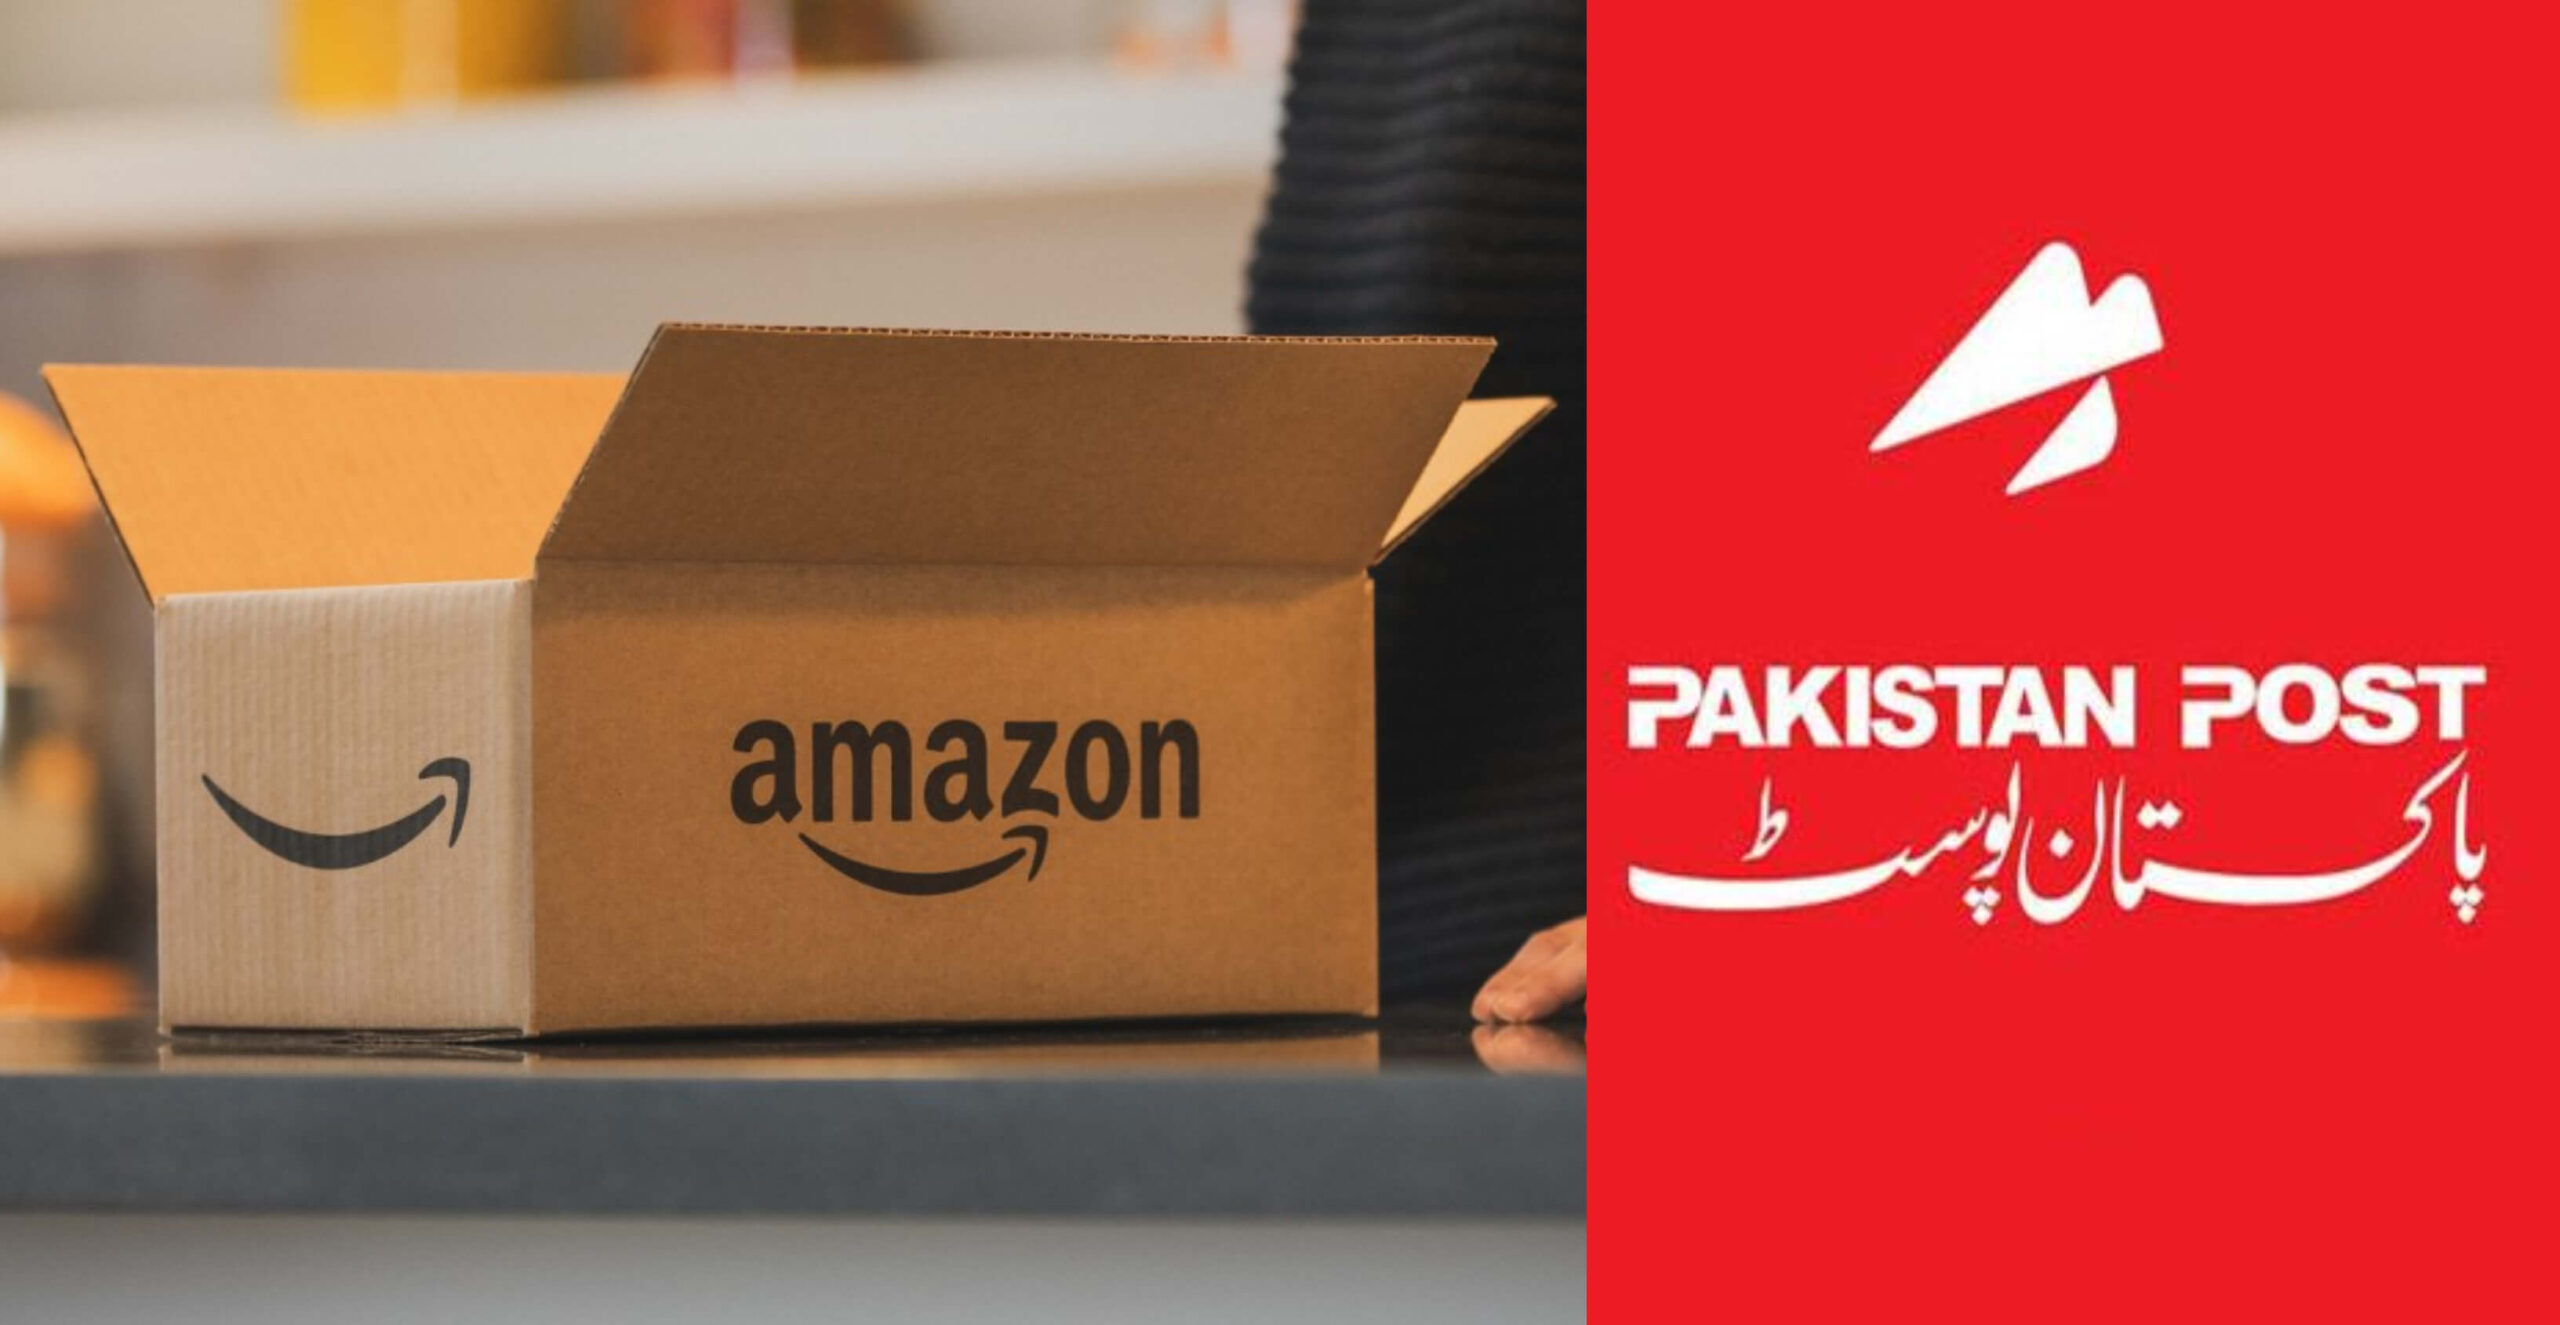 Pakistan Post confirmed to be Amazon’s official delivery partner